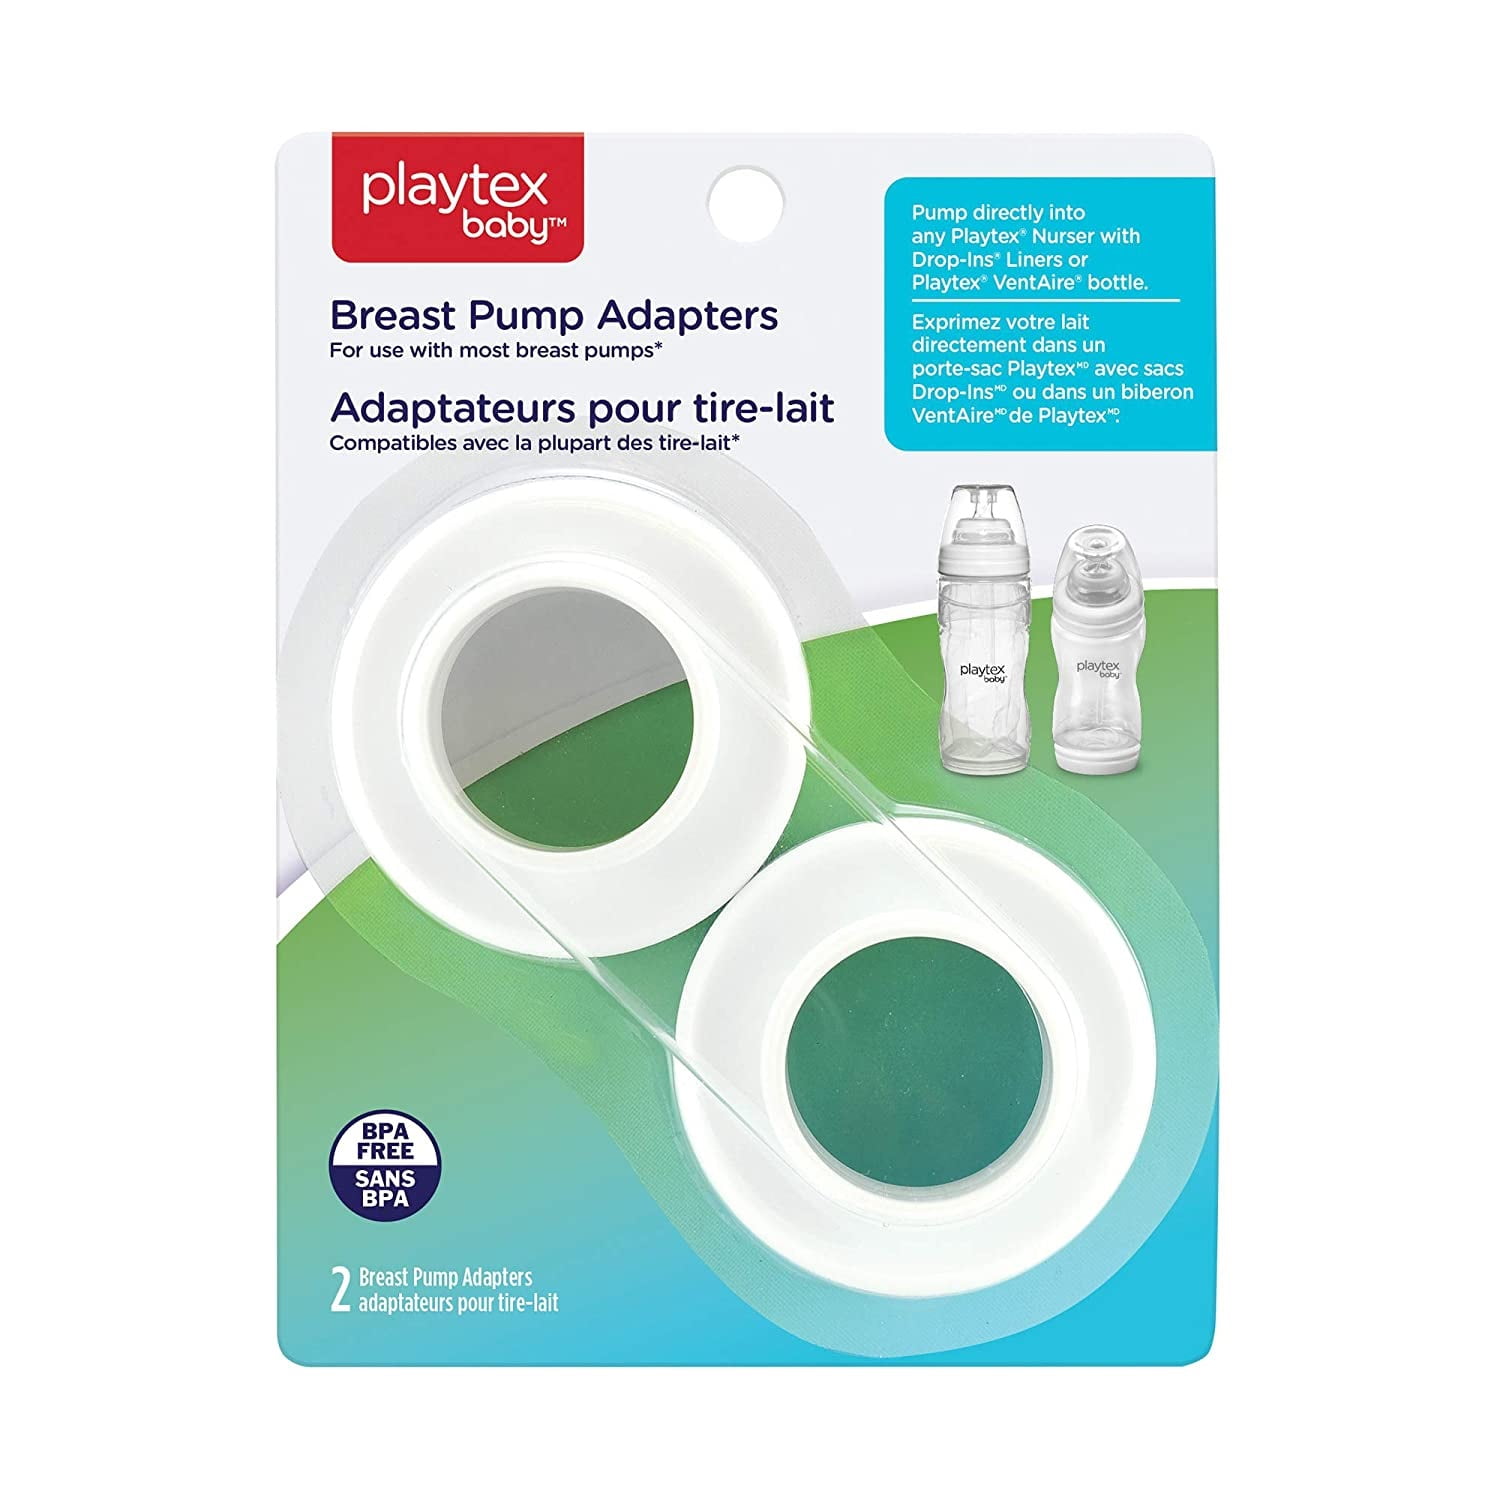 Playtex Baby Breast Pump Adapters for Use with Most Breast Pumps, 2 Walmart.com